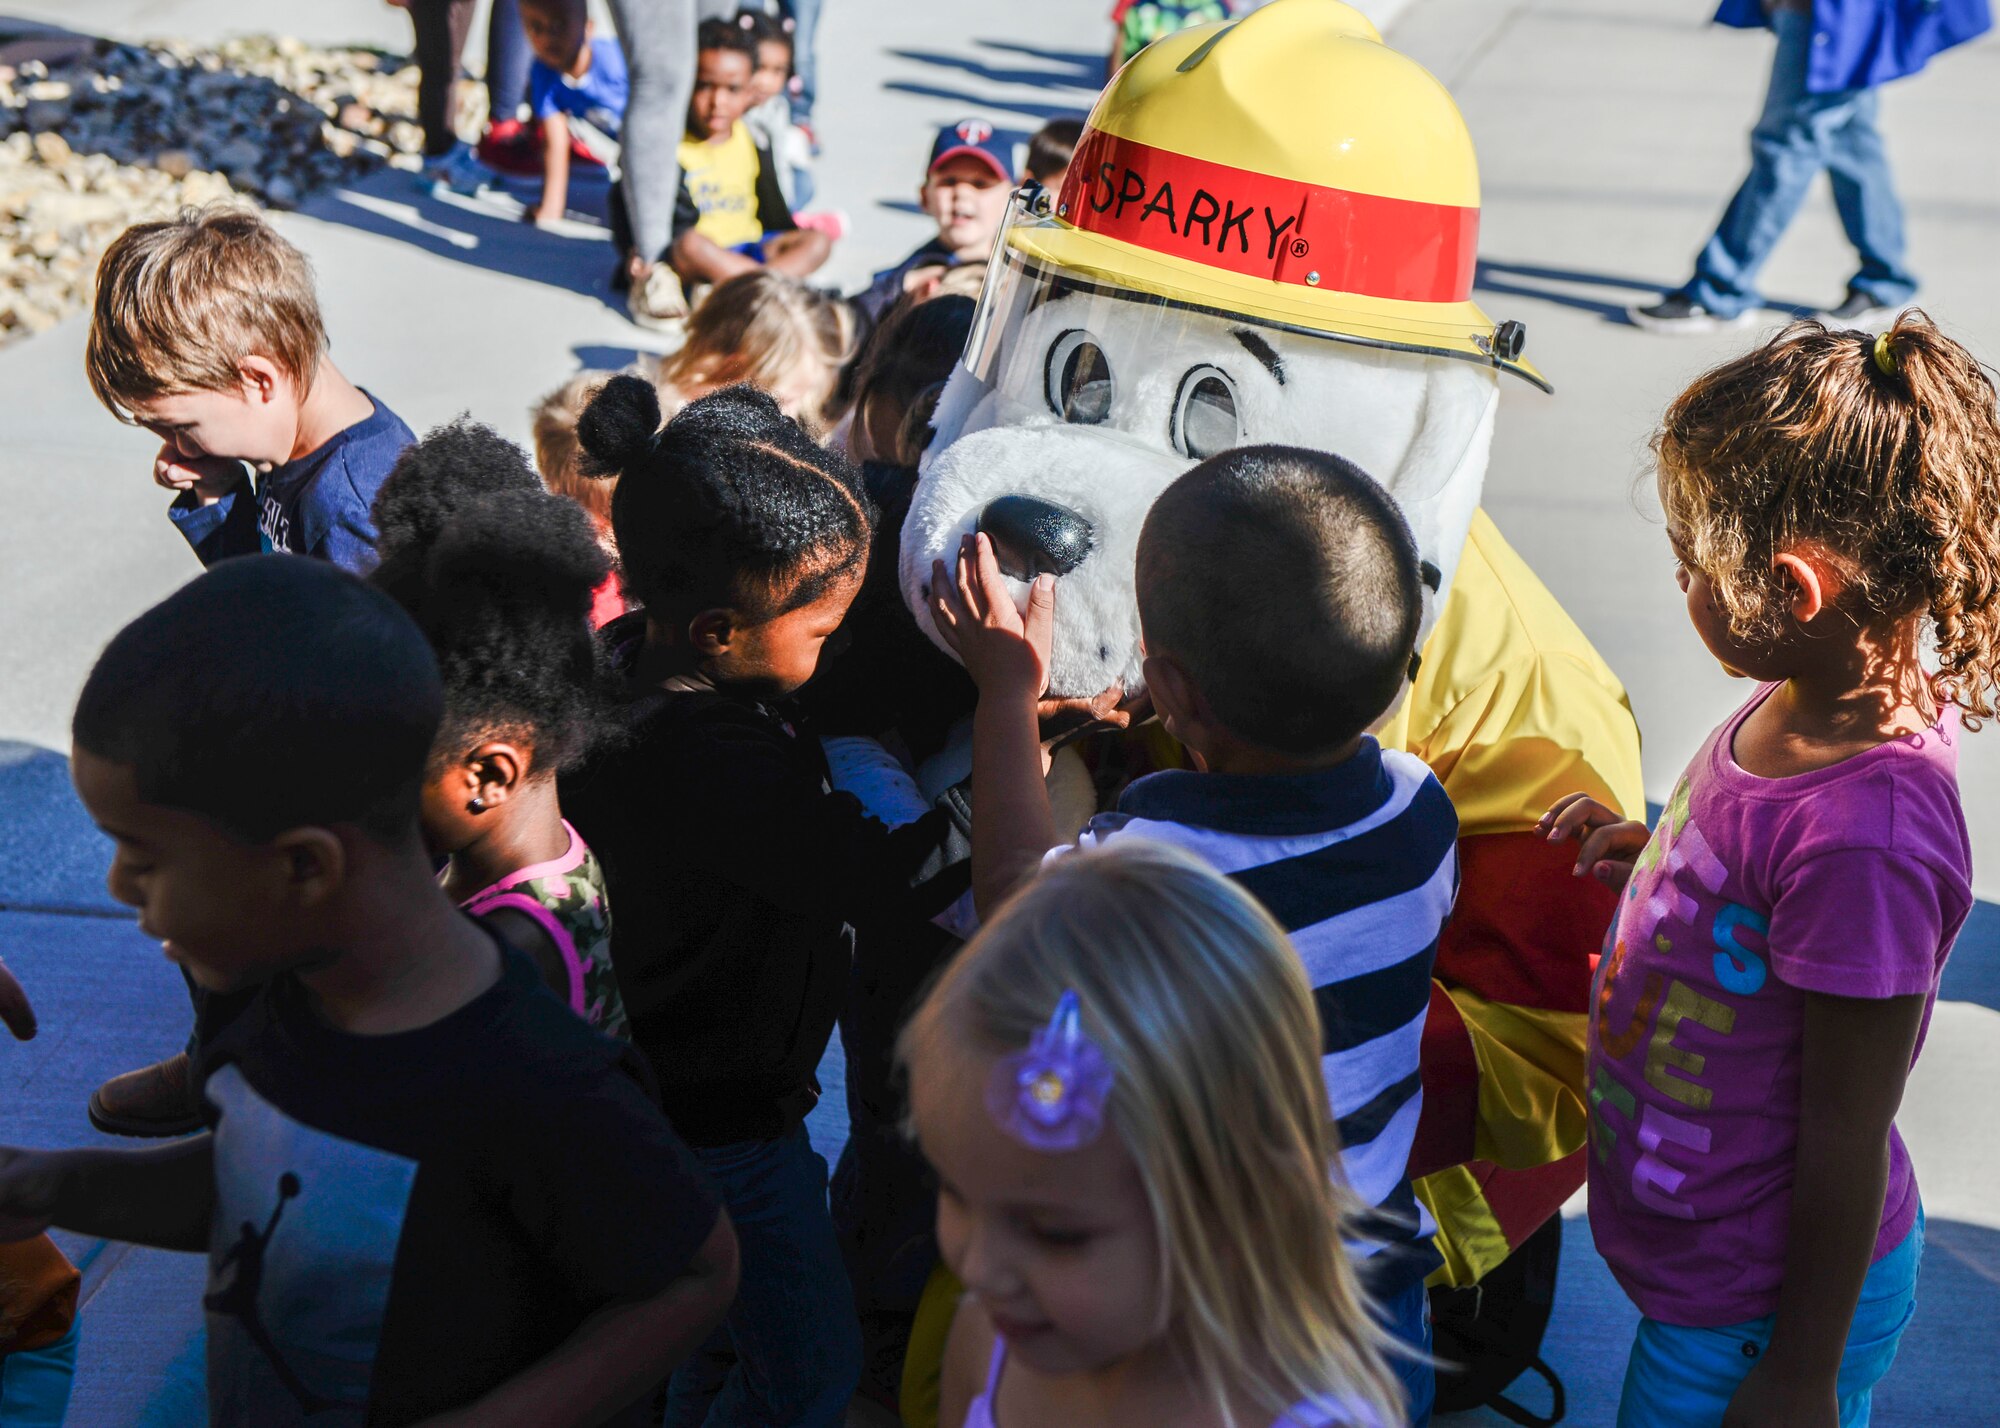 A group of children greet Sparky the Fire Dog during a visit to the child development center as part of Holloman Air Force Base’s annual Fire Prevention Week, Oct. 14, 2016. Members of the 49th Civil Engineer Squadron Fire Protection Flight also visited the center to teach children about fire safety and prevention. (U.S. Air Force photo by Airman 1st Class Airman Alexis P. Docherty)